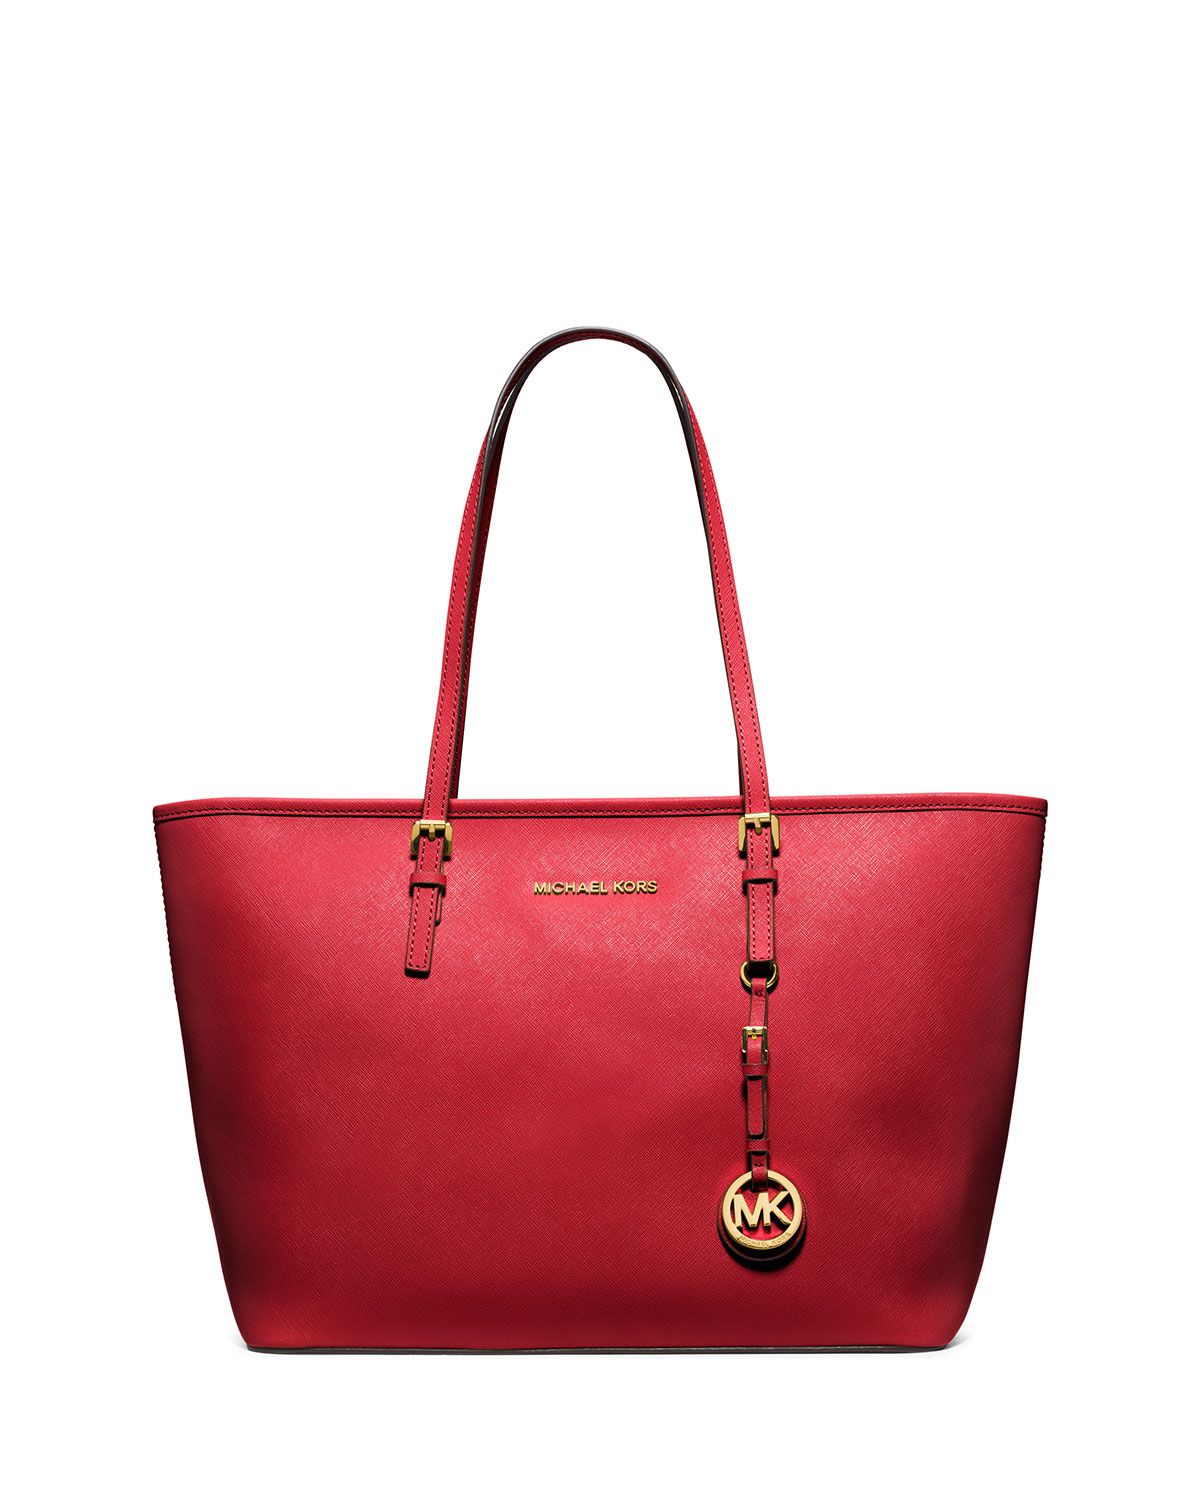 michael kors red travel tote